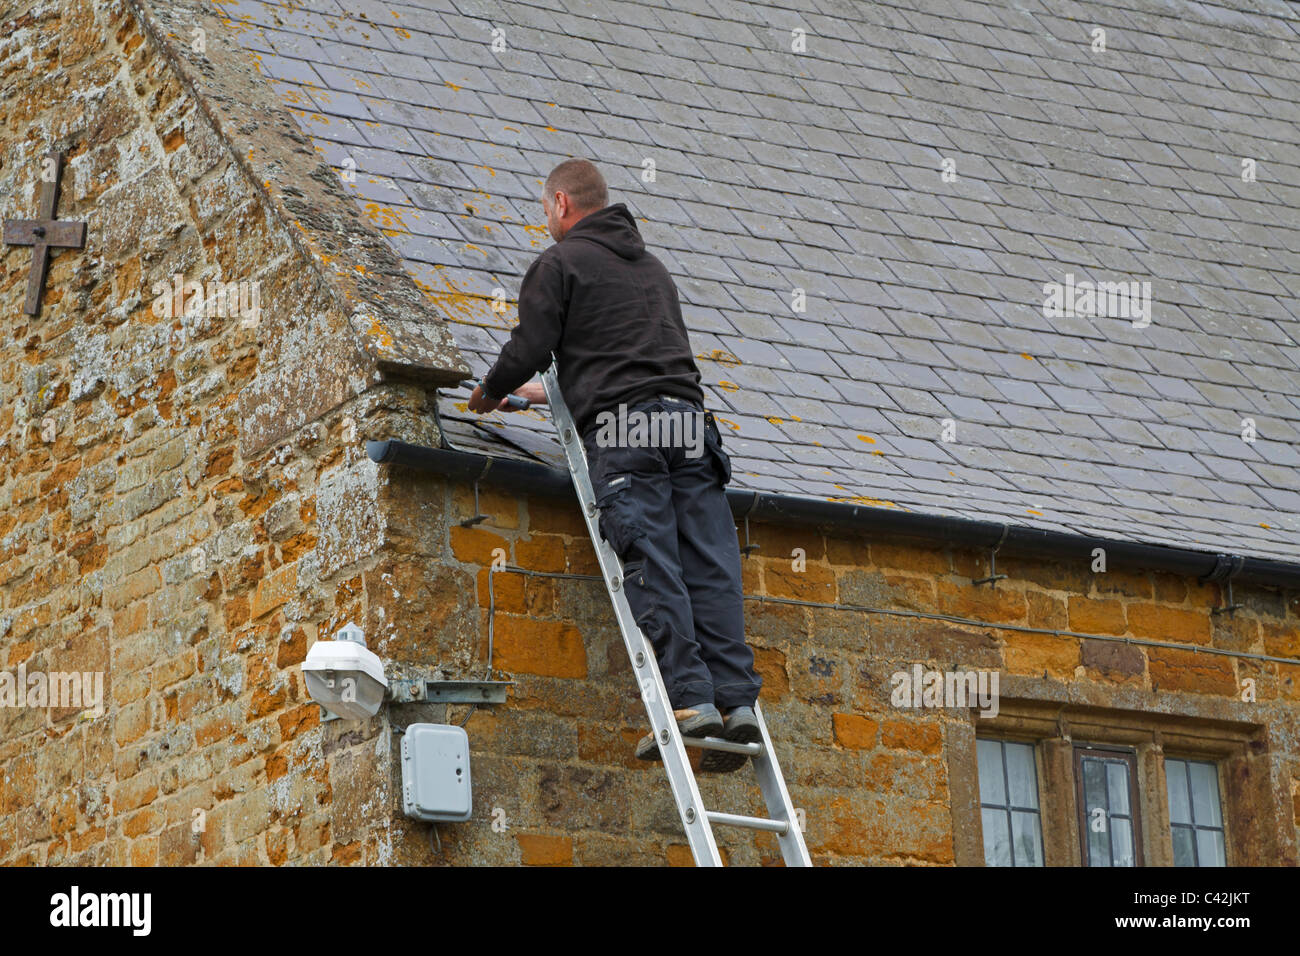 Workman mending a slate roof, Lyddington, Rutland. A handyman at the top of a ladder replacing a slate on an old stone house. Stock Photo